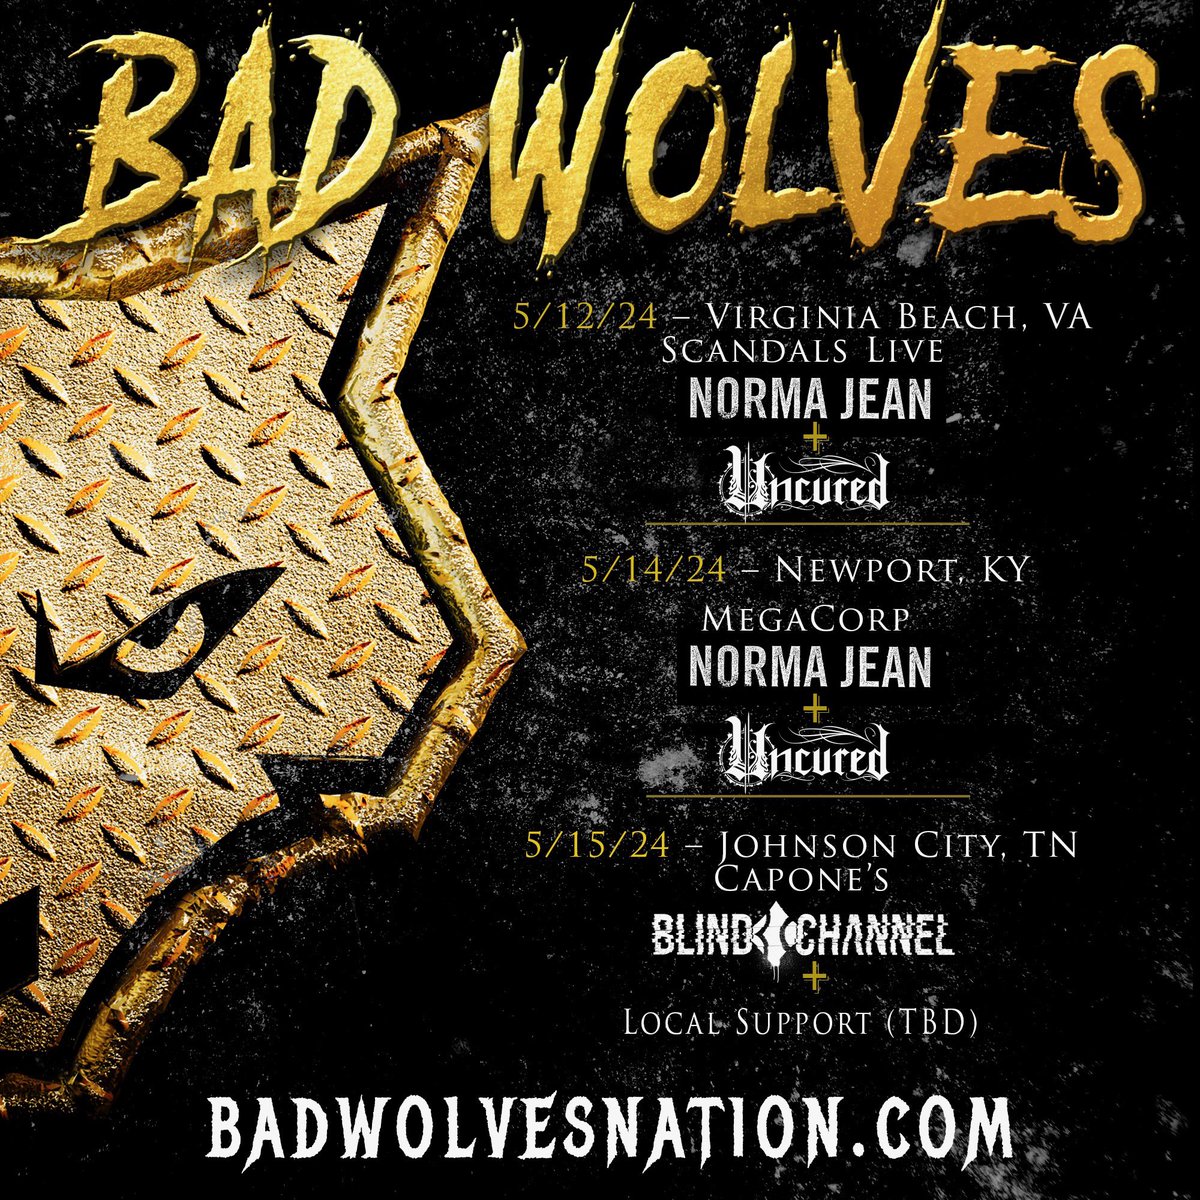 We are psyched to announce 2 more shows with our friends in @badwolves. Come see us support #BadWolves & @NormaJeanBand on May 12th & May 14th in Virginia and Kentucky!🐺 badwolvesnation.com